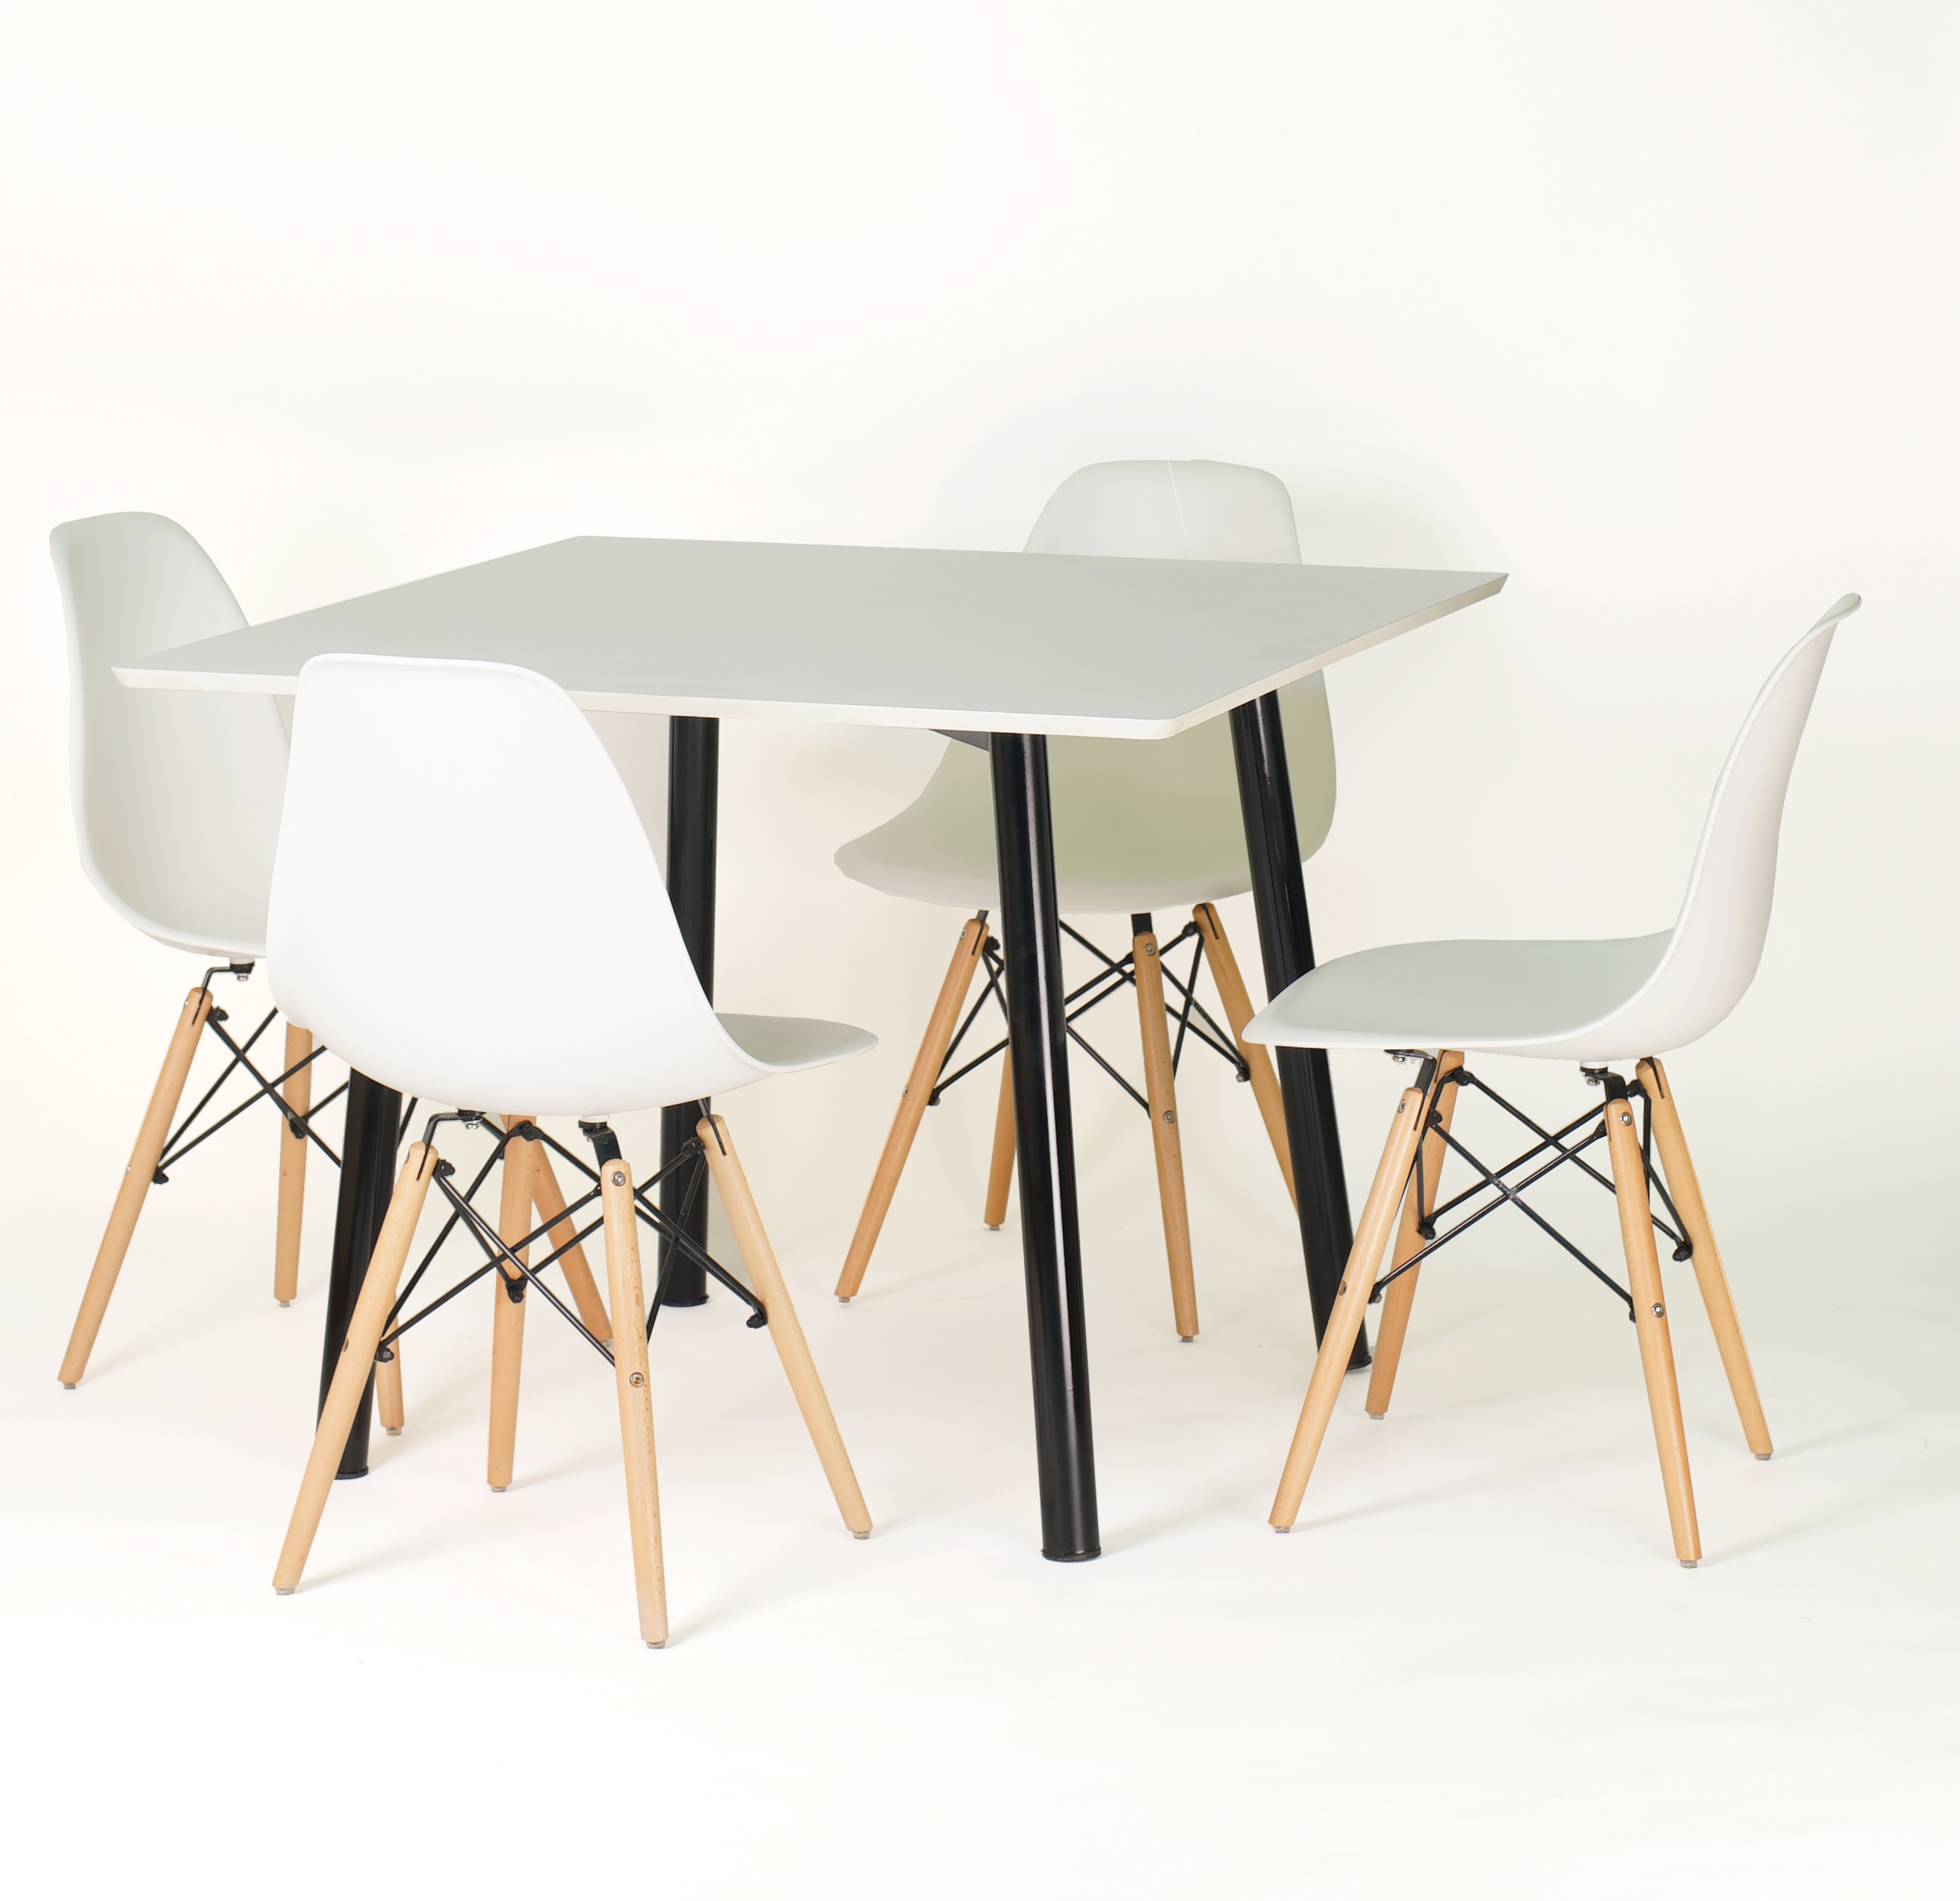 CFH HEMING Table, 100cm Square (White) with 4 CHARLES Chair, Wood Legs ...